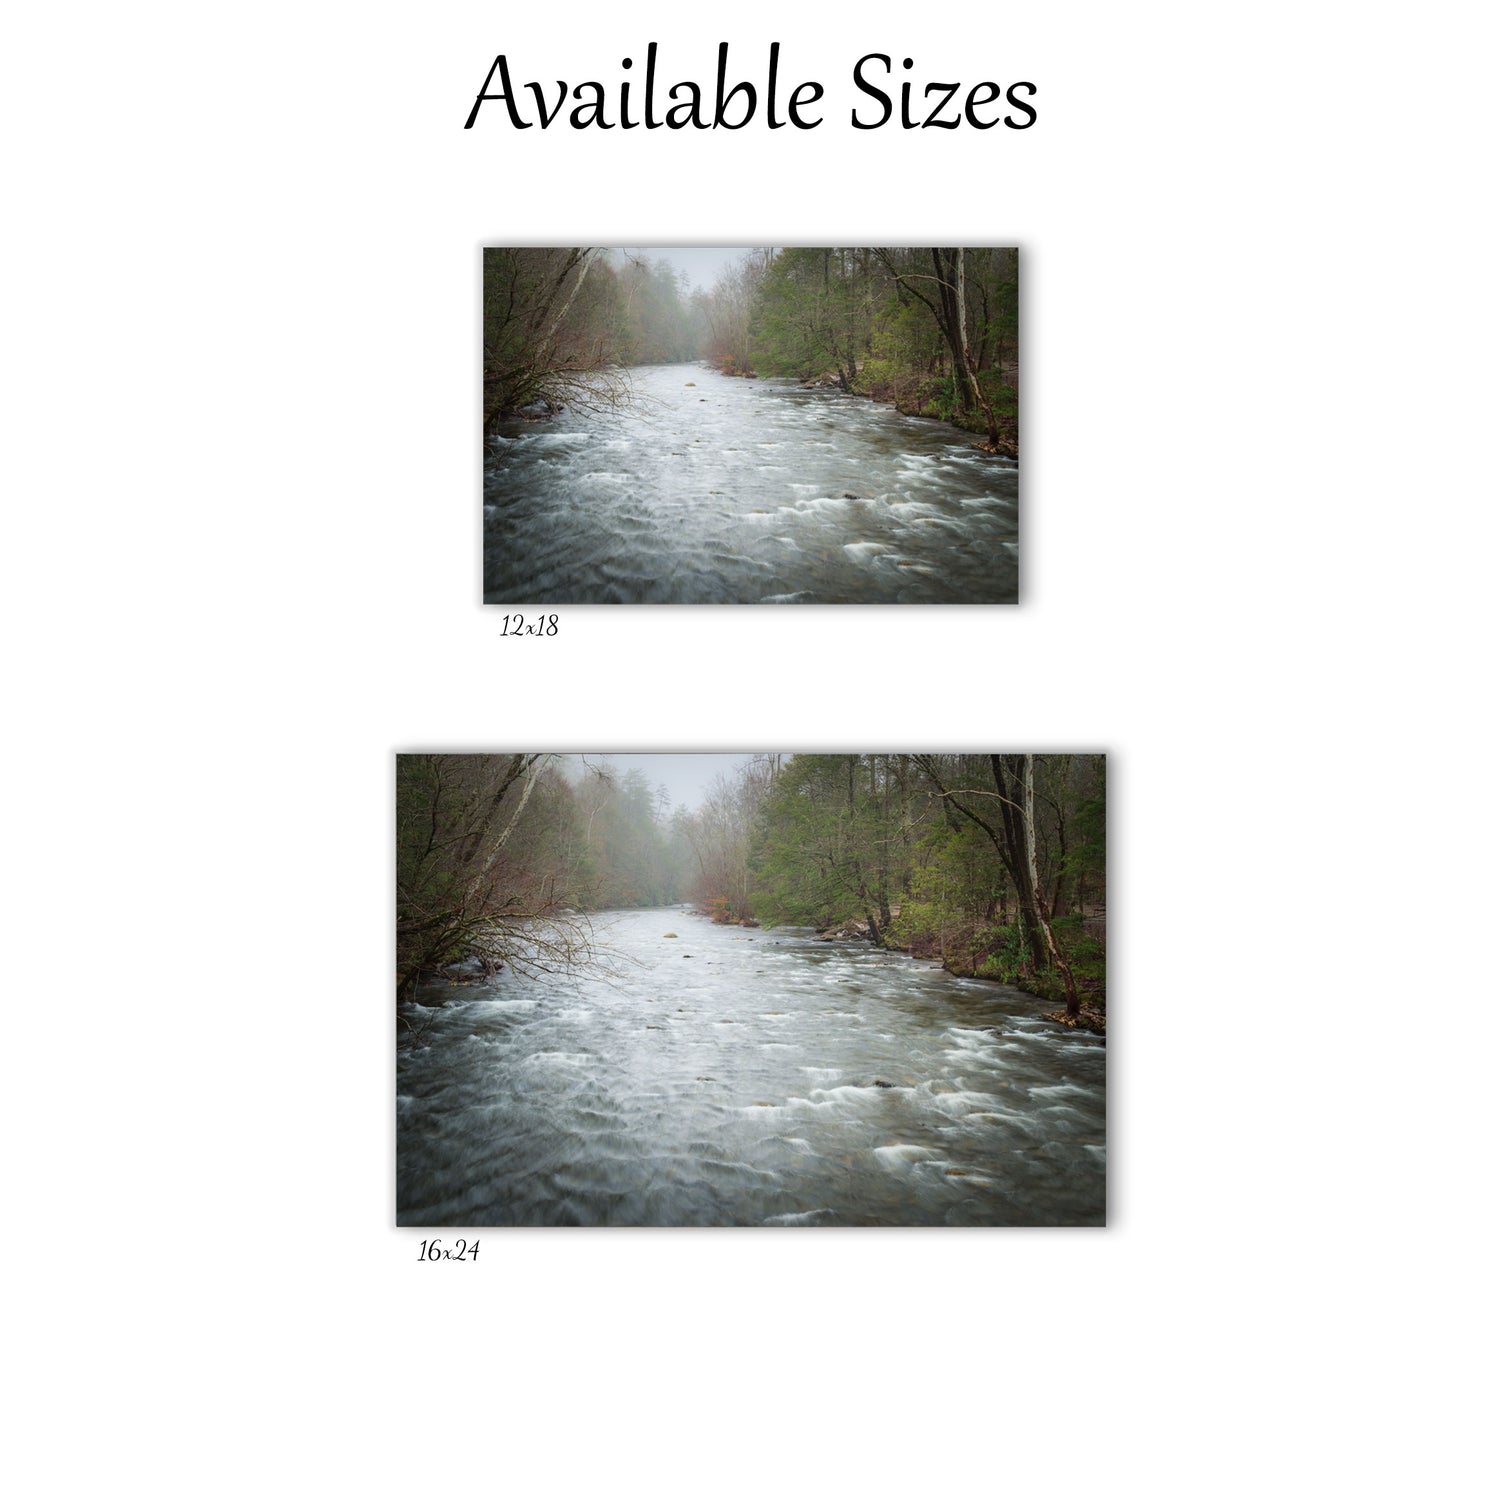 Visual representation of the canvas wall art print sizes available: 12x18 and 16x24.